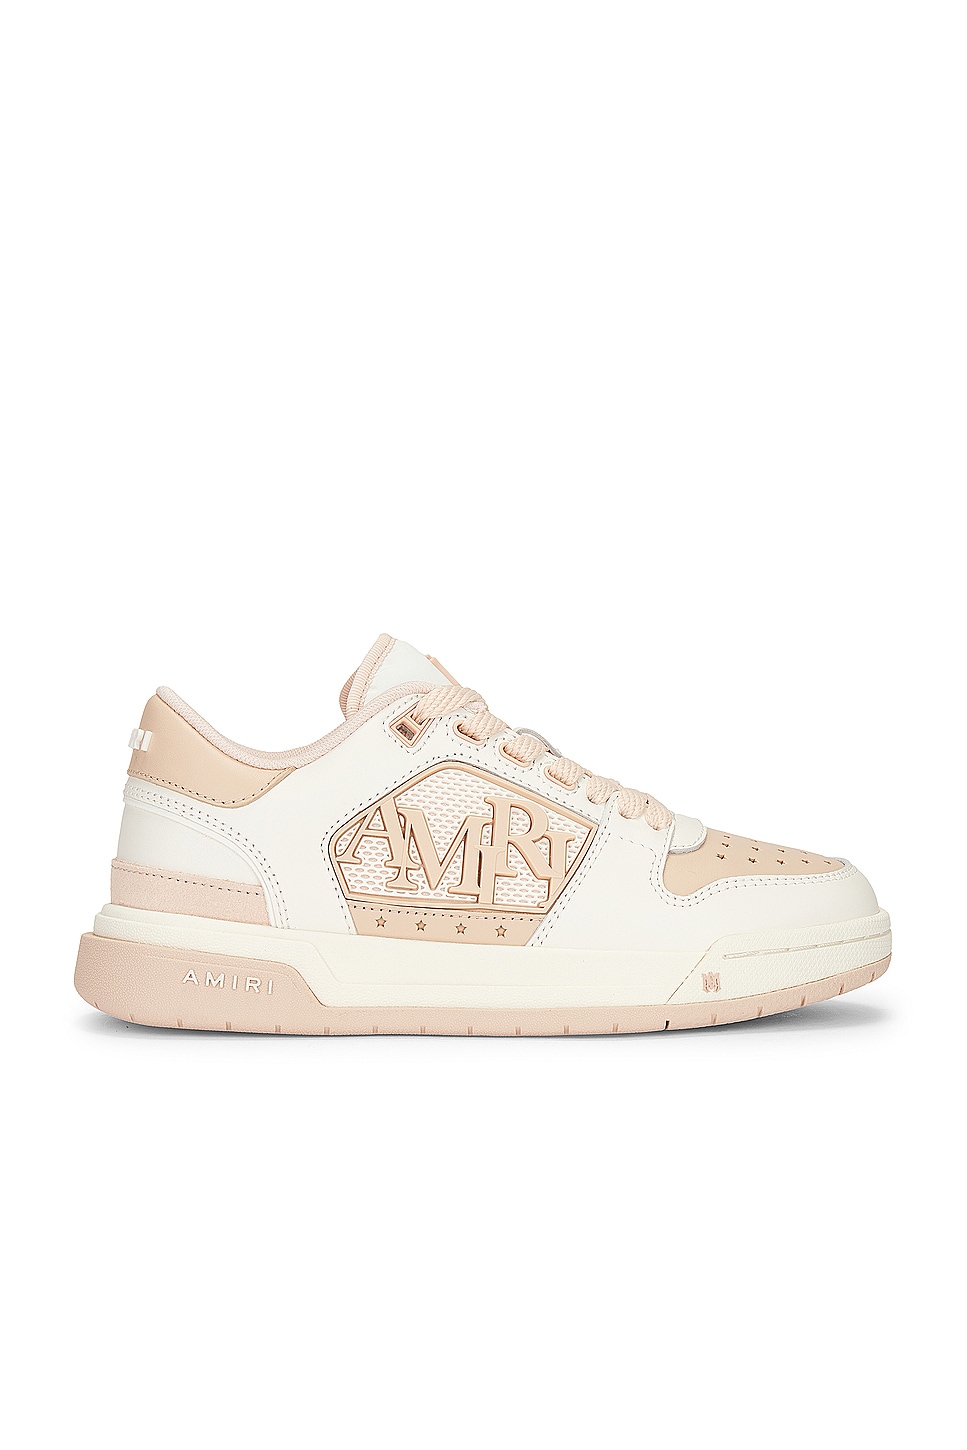 Image 1 of Amiri Classic Low Sneaker in White Pink